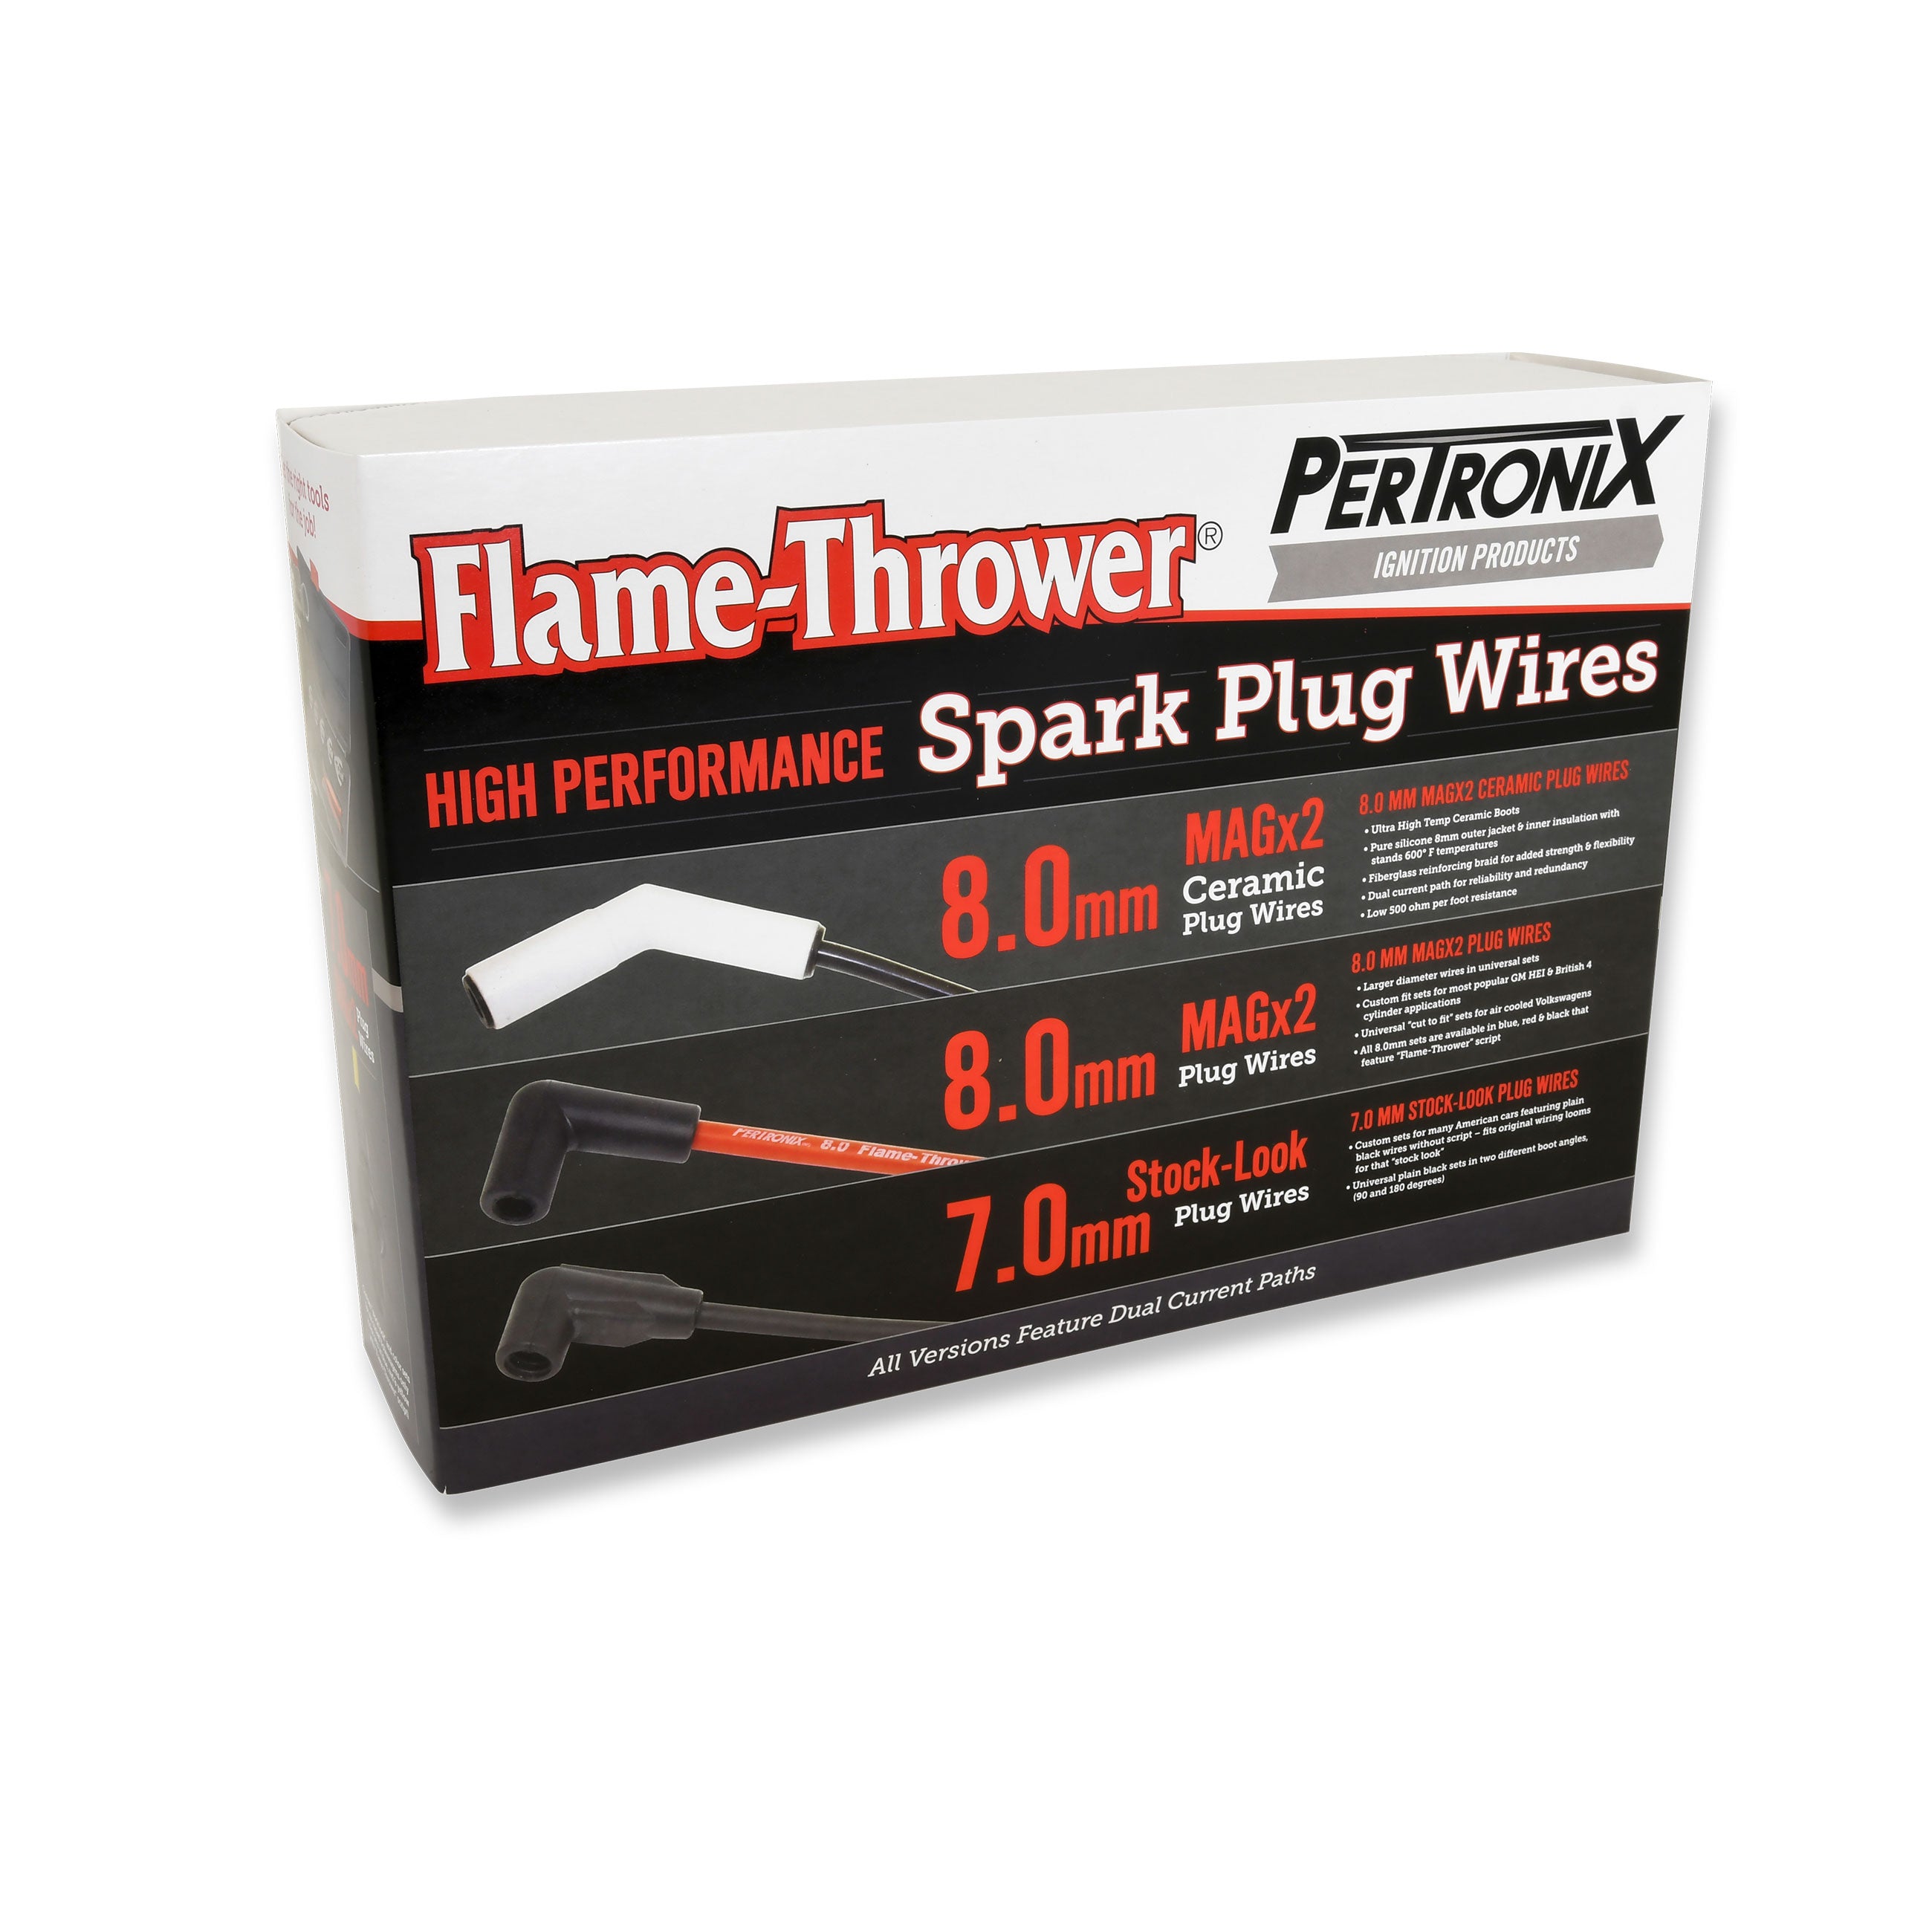 PerTronix 808290HT Flame-Thrower Spark Plug Wires 8 cyl 8mm 